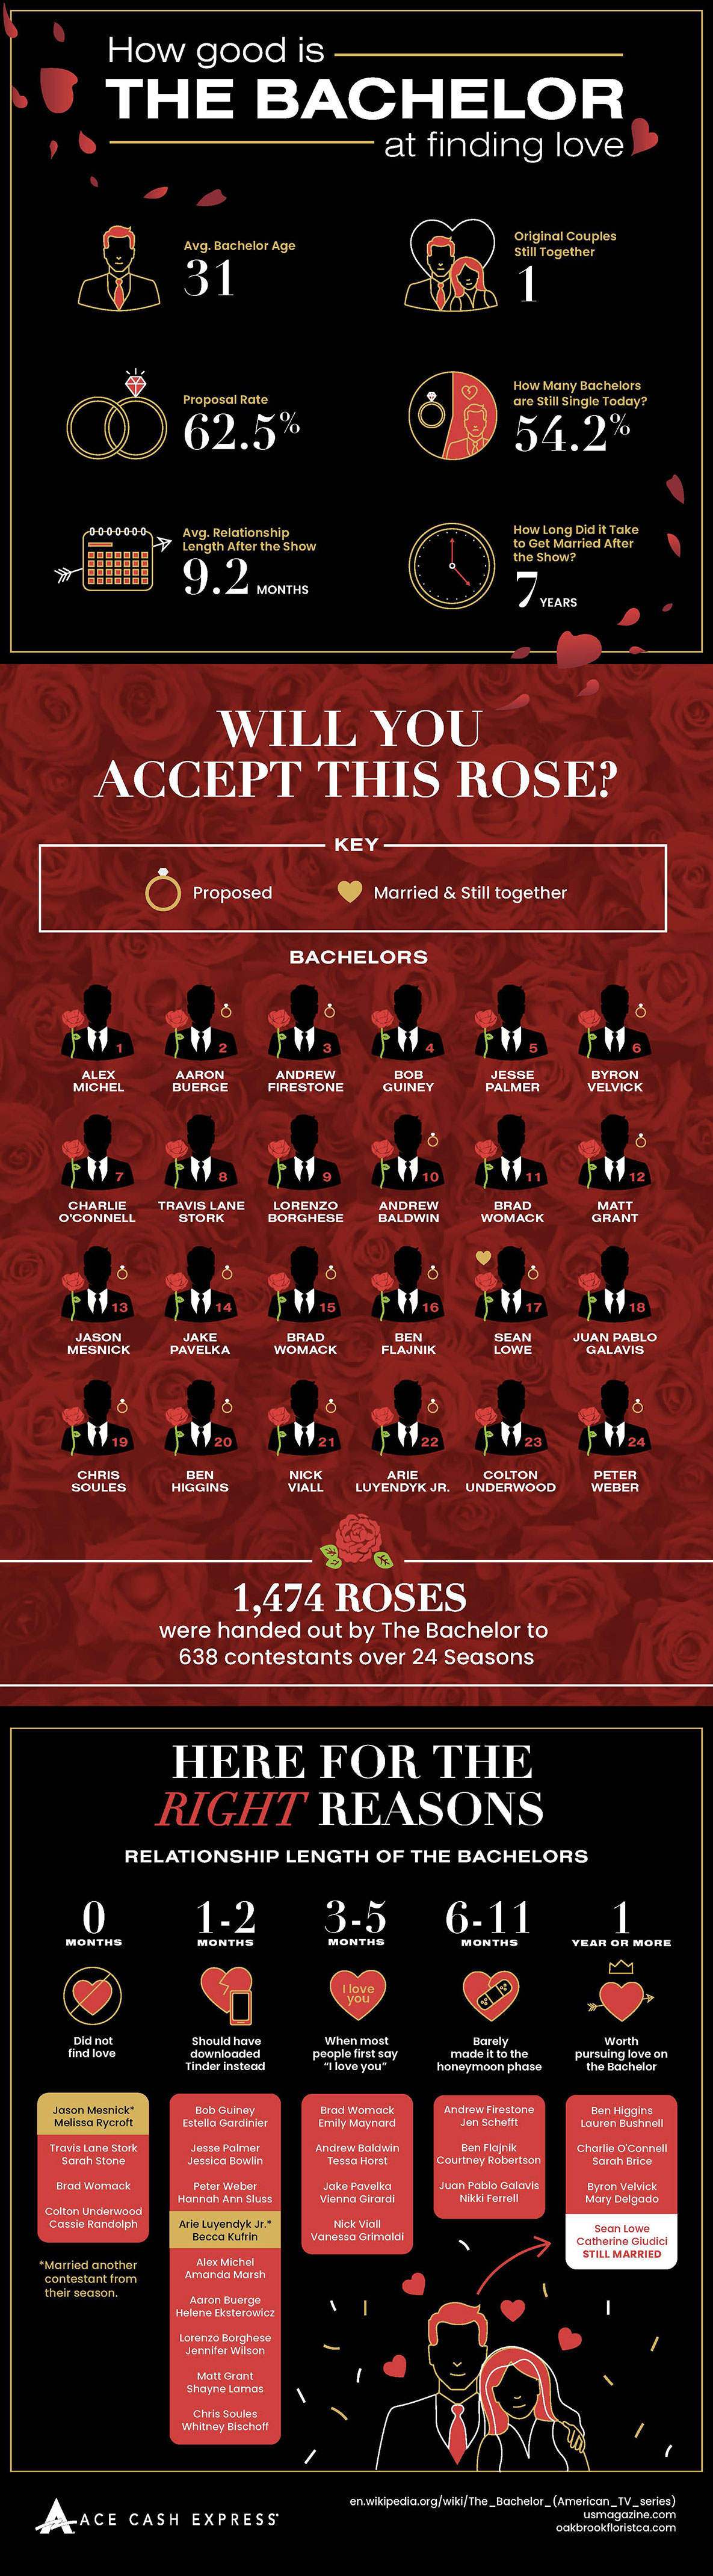 Finding True Love on ‘The Bachelor’ Infographic